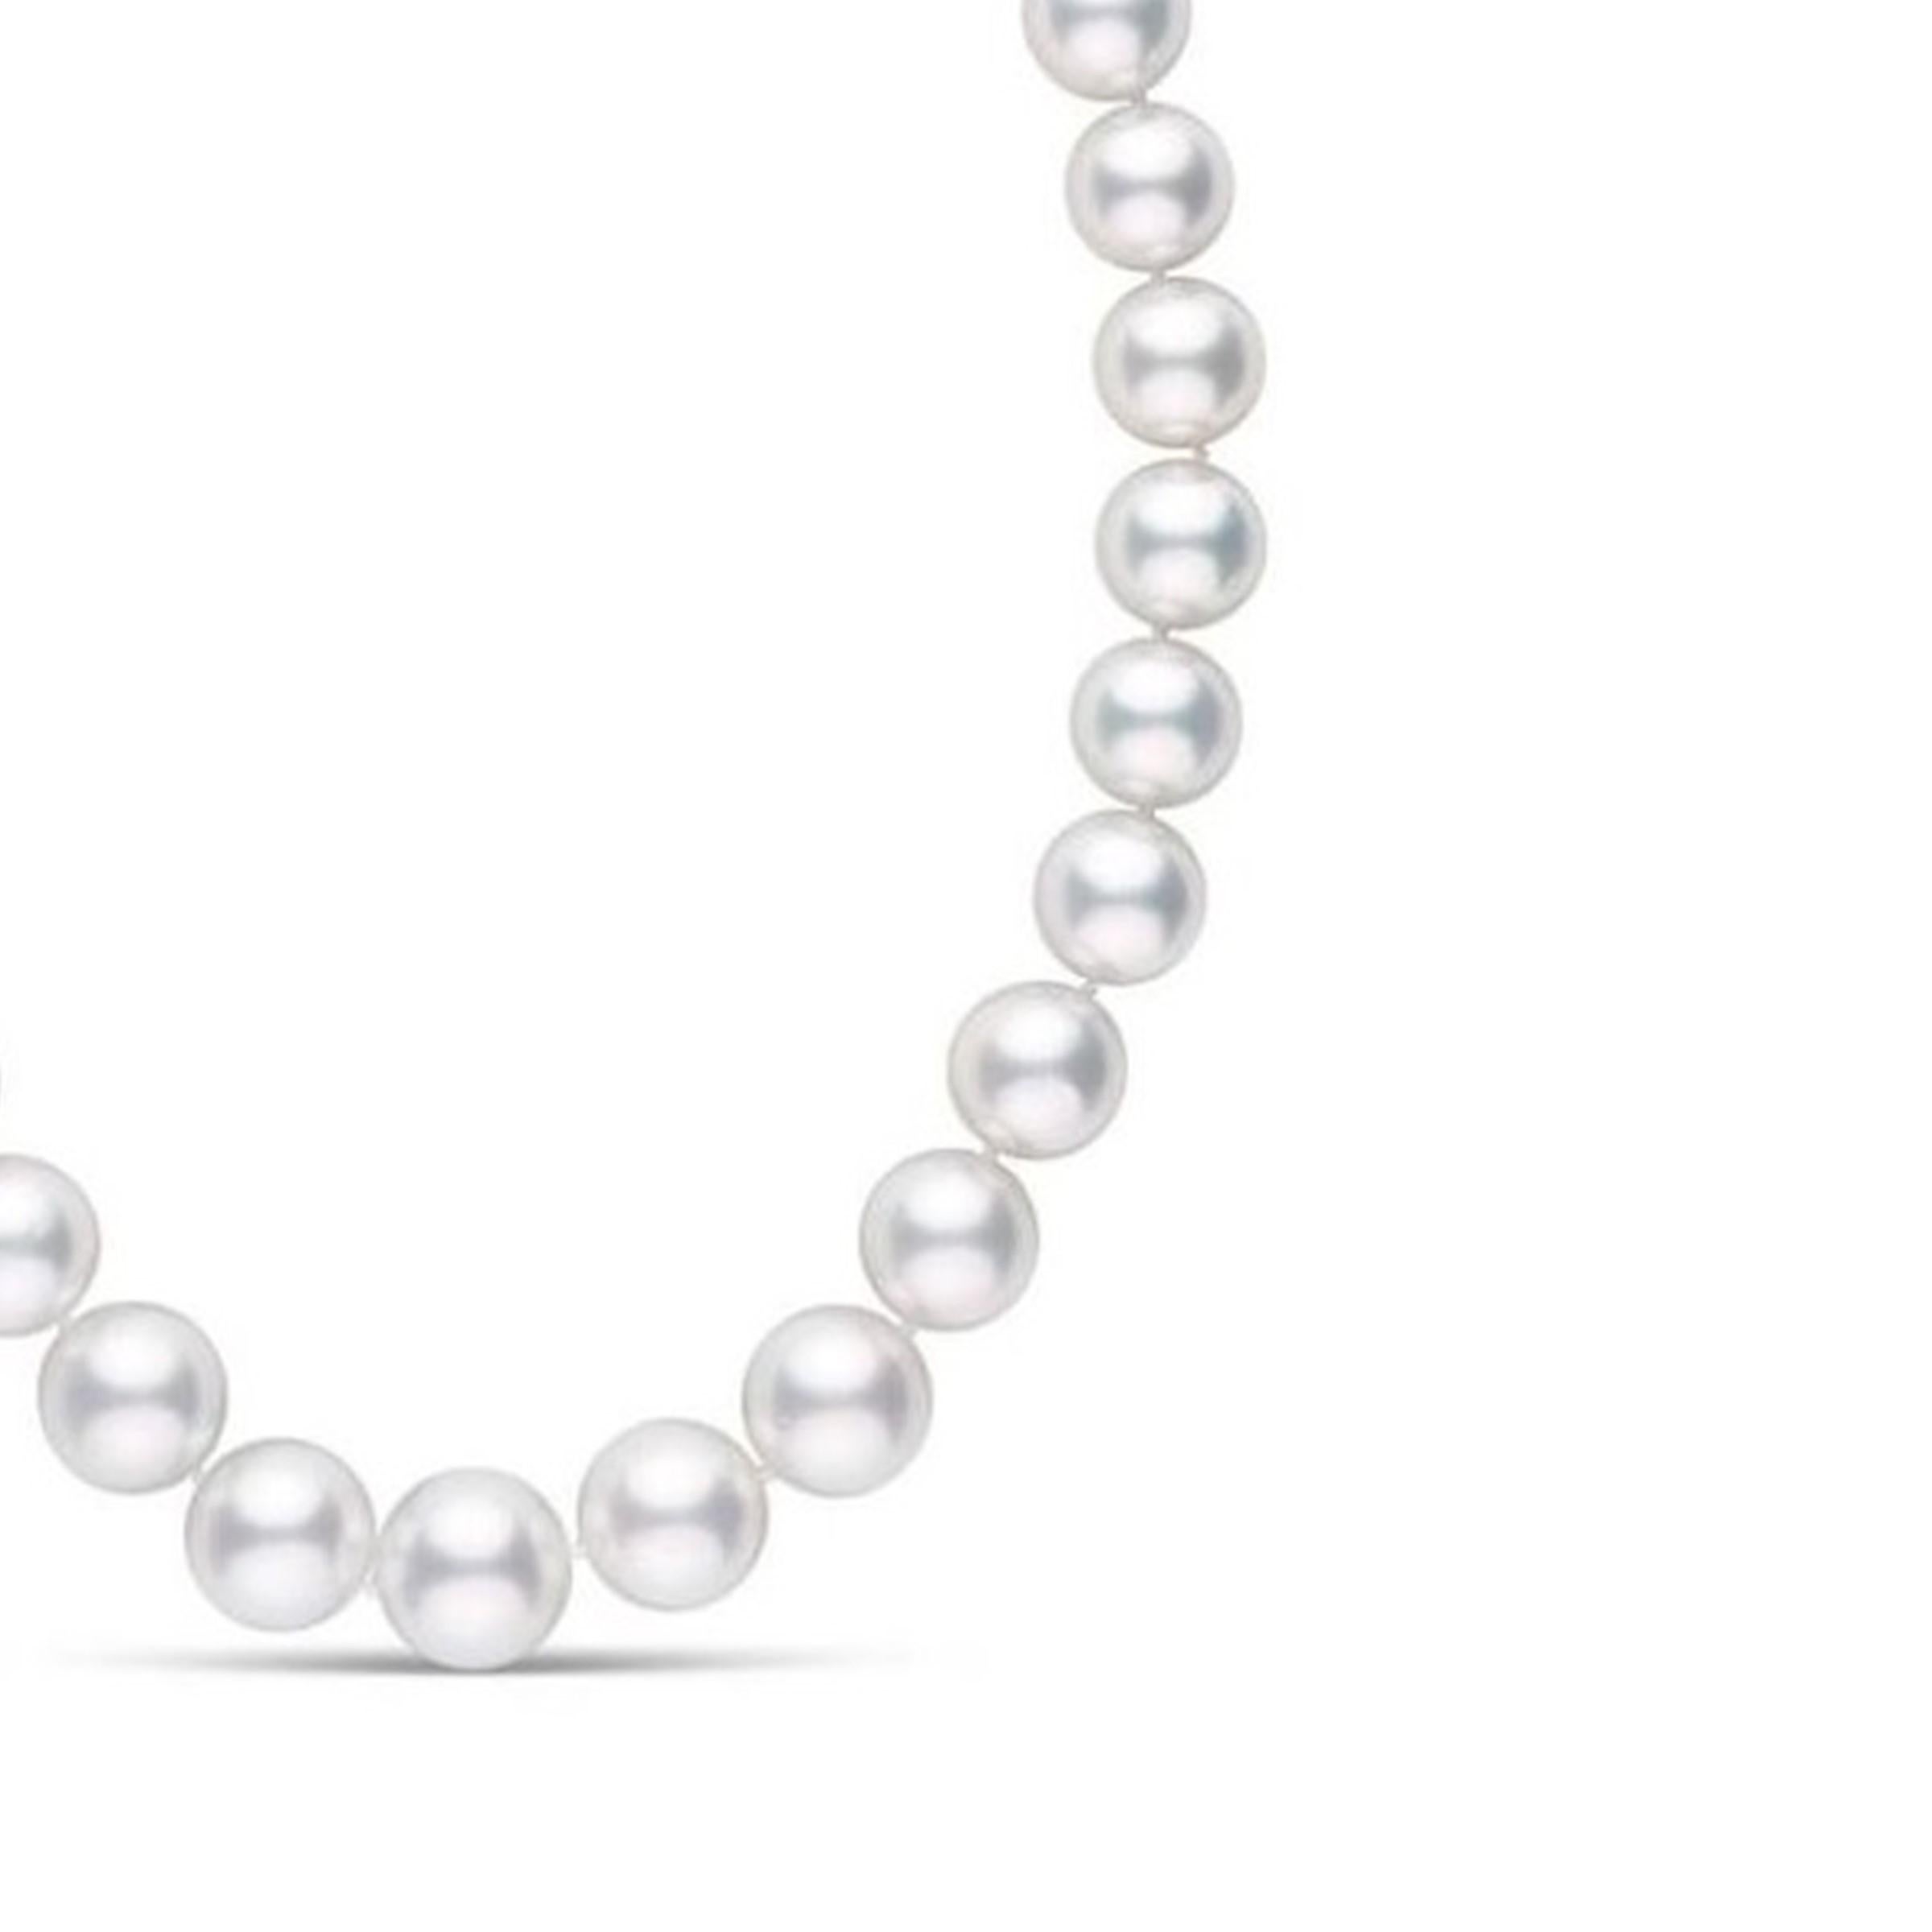 This exquisite South Sea pearl necklace features 9.0-11.0mm, AAA quality pearls hand-picked for their radiant luster. 
This princess length necklace comes packaged in a beautiful jewelry gift box. Just perfect for your next momentous